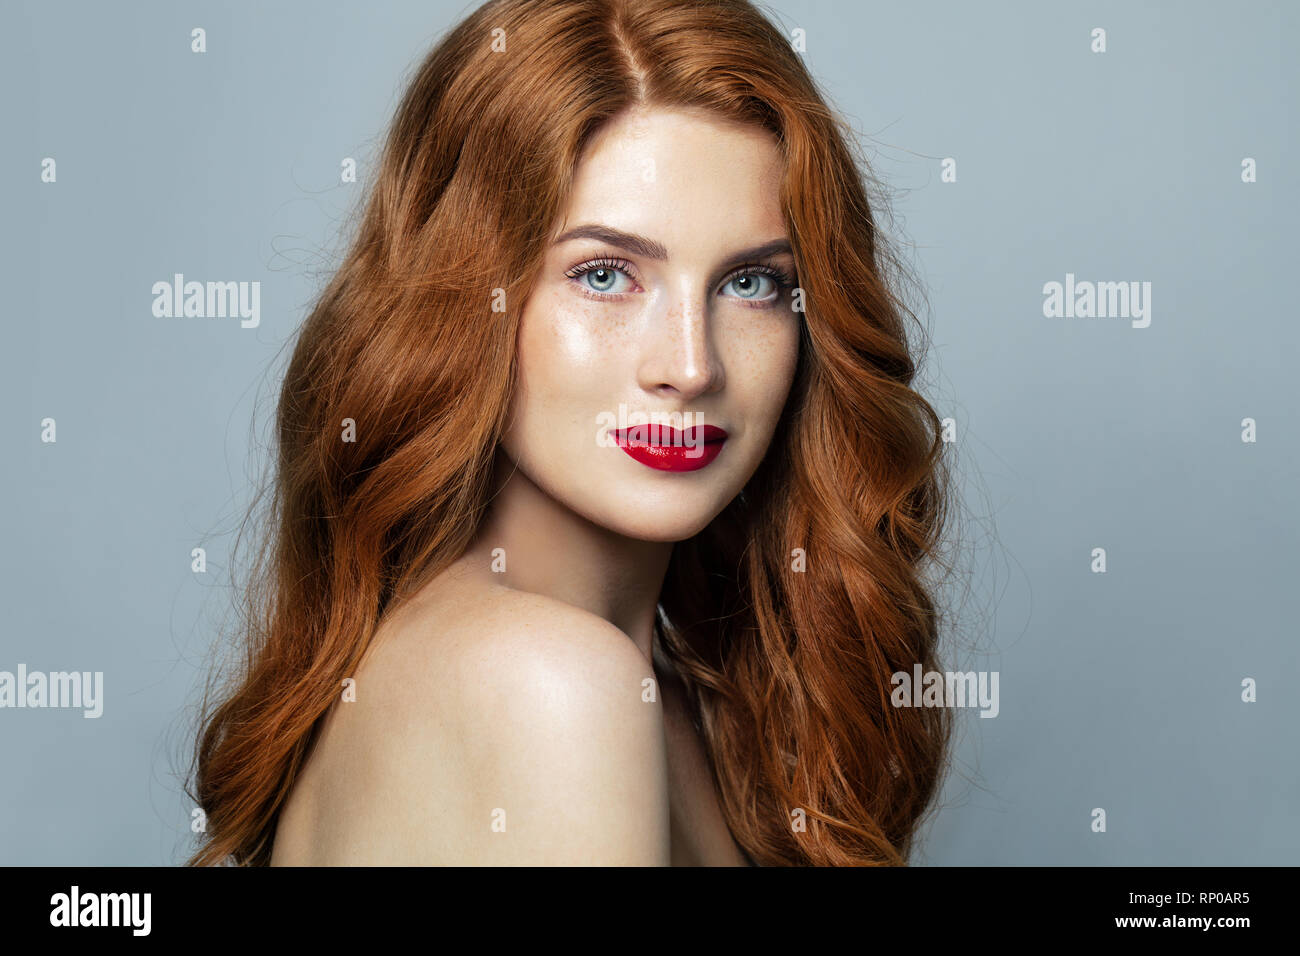 Pretty red haired woman studio portrait. Redhead girl smiling Stock Photo